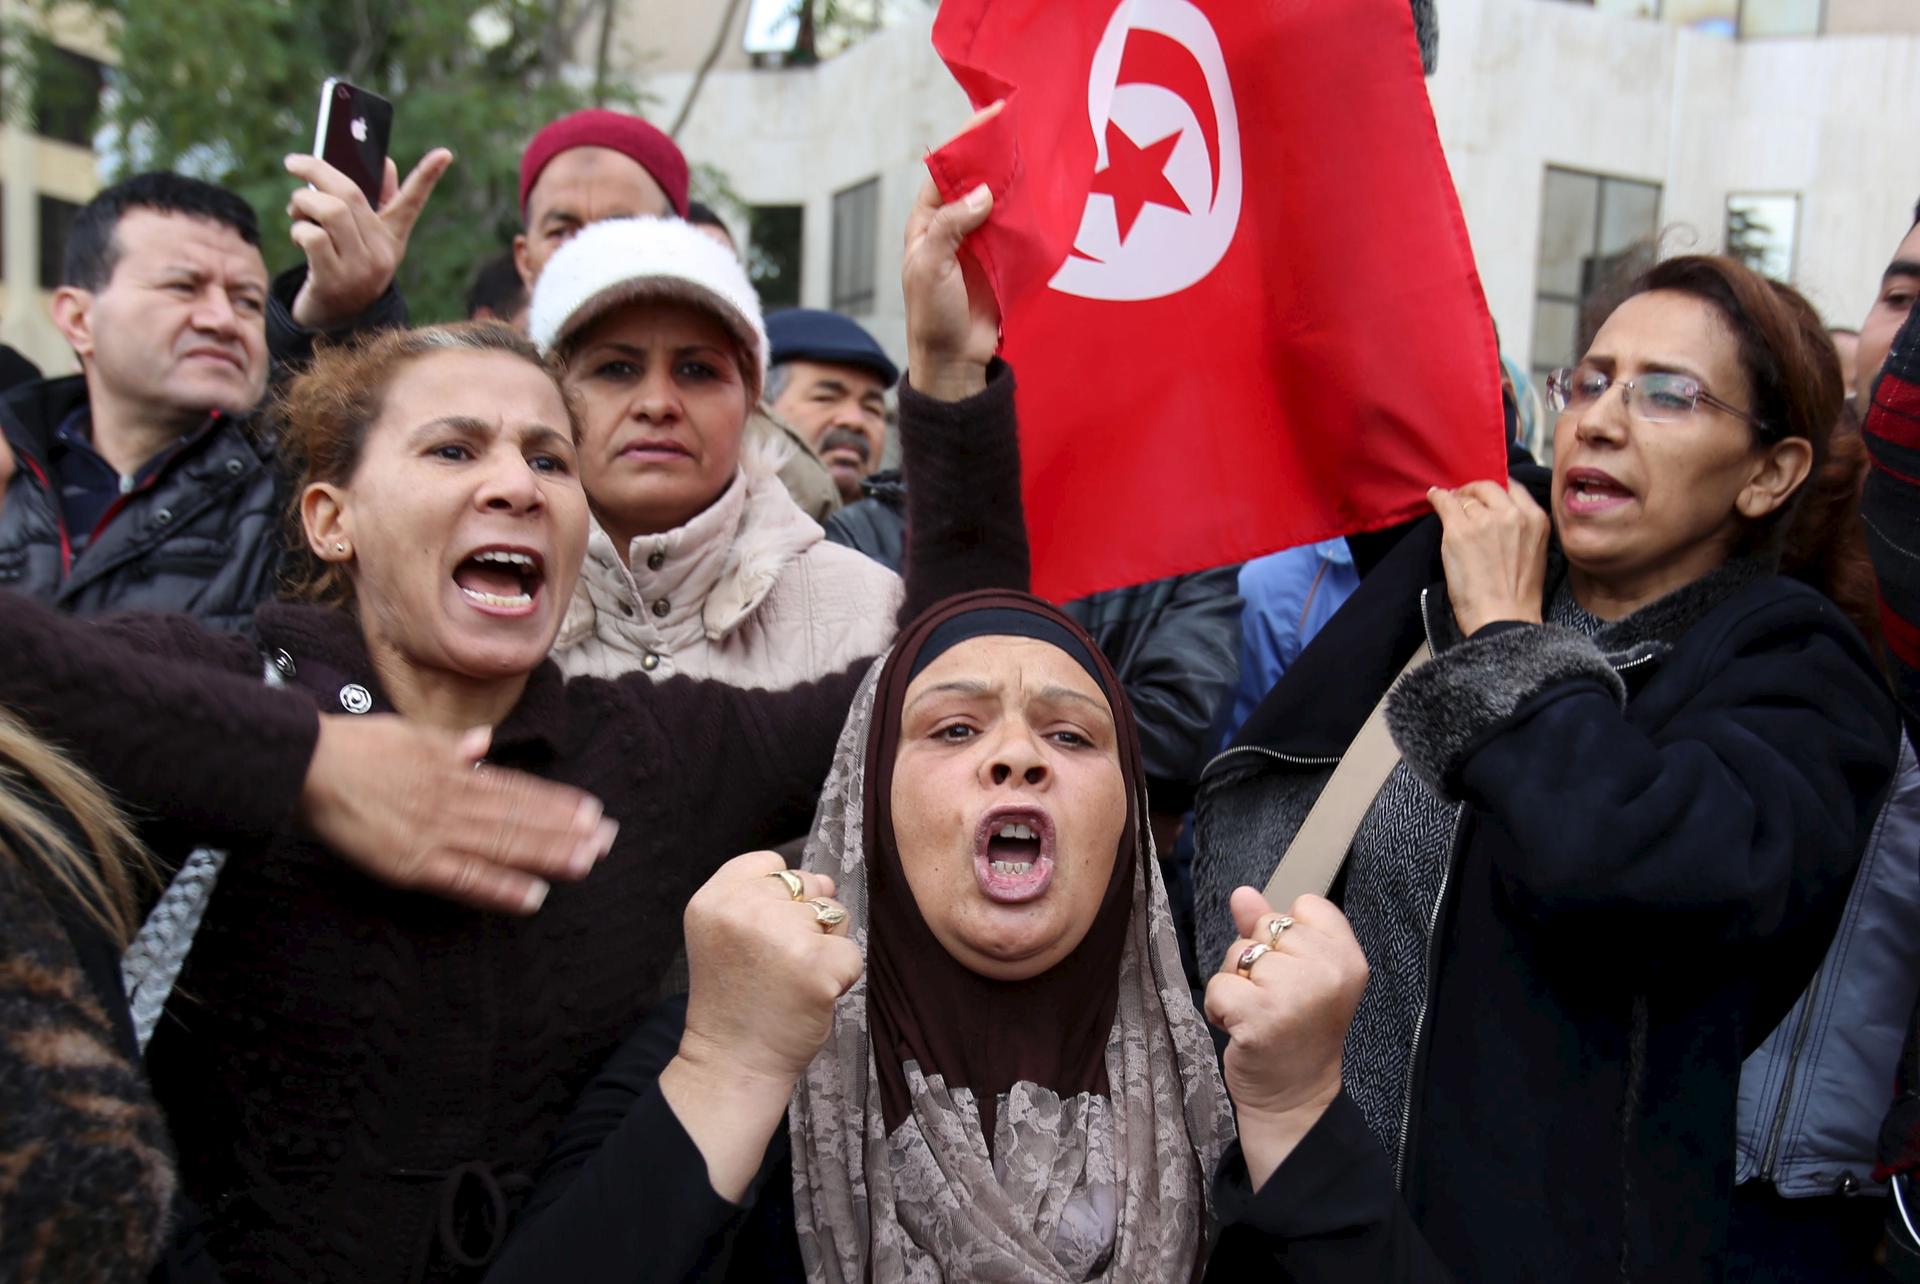 People shout slogans at a protest to condemn a suicide bomb attack in Tunis, Tunisia November 25, 2015.